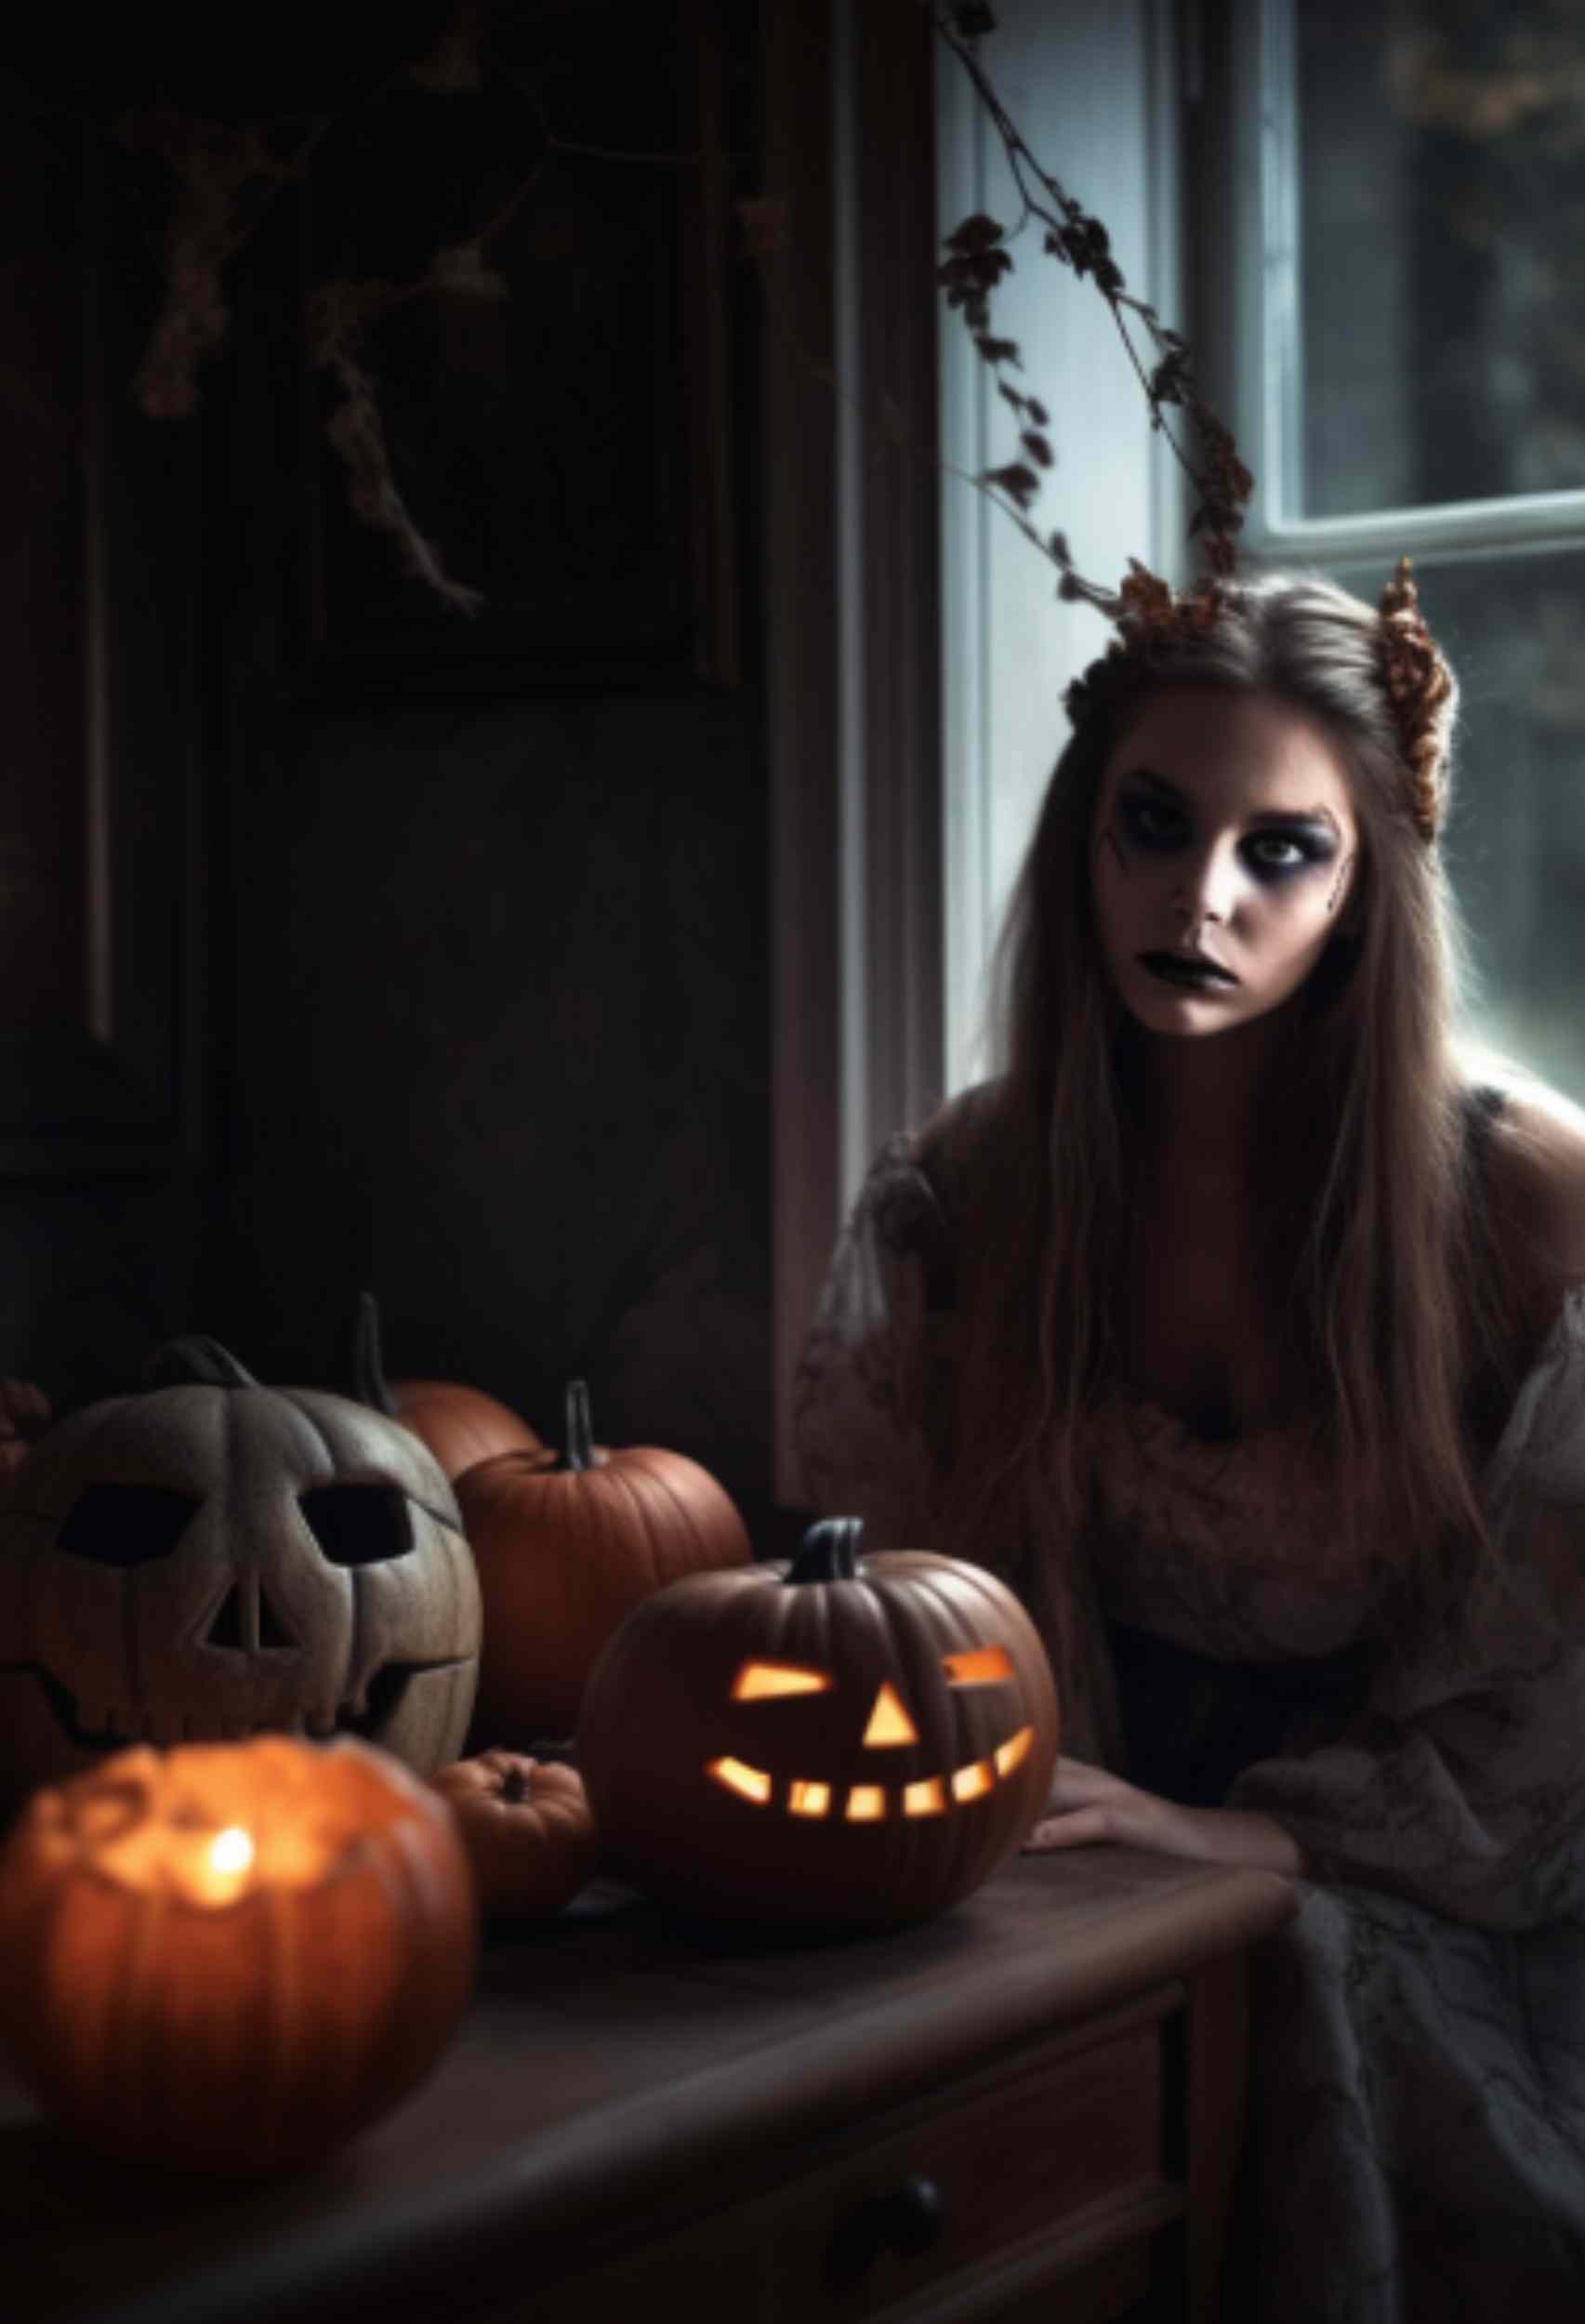 Spectacular Halloween Adventures: 25 Spine-Tingling Things to Do This October